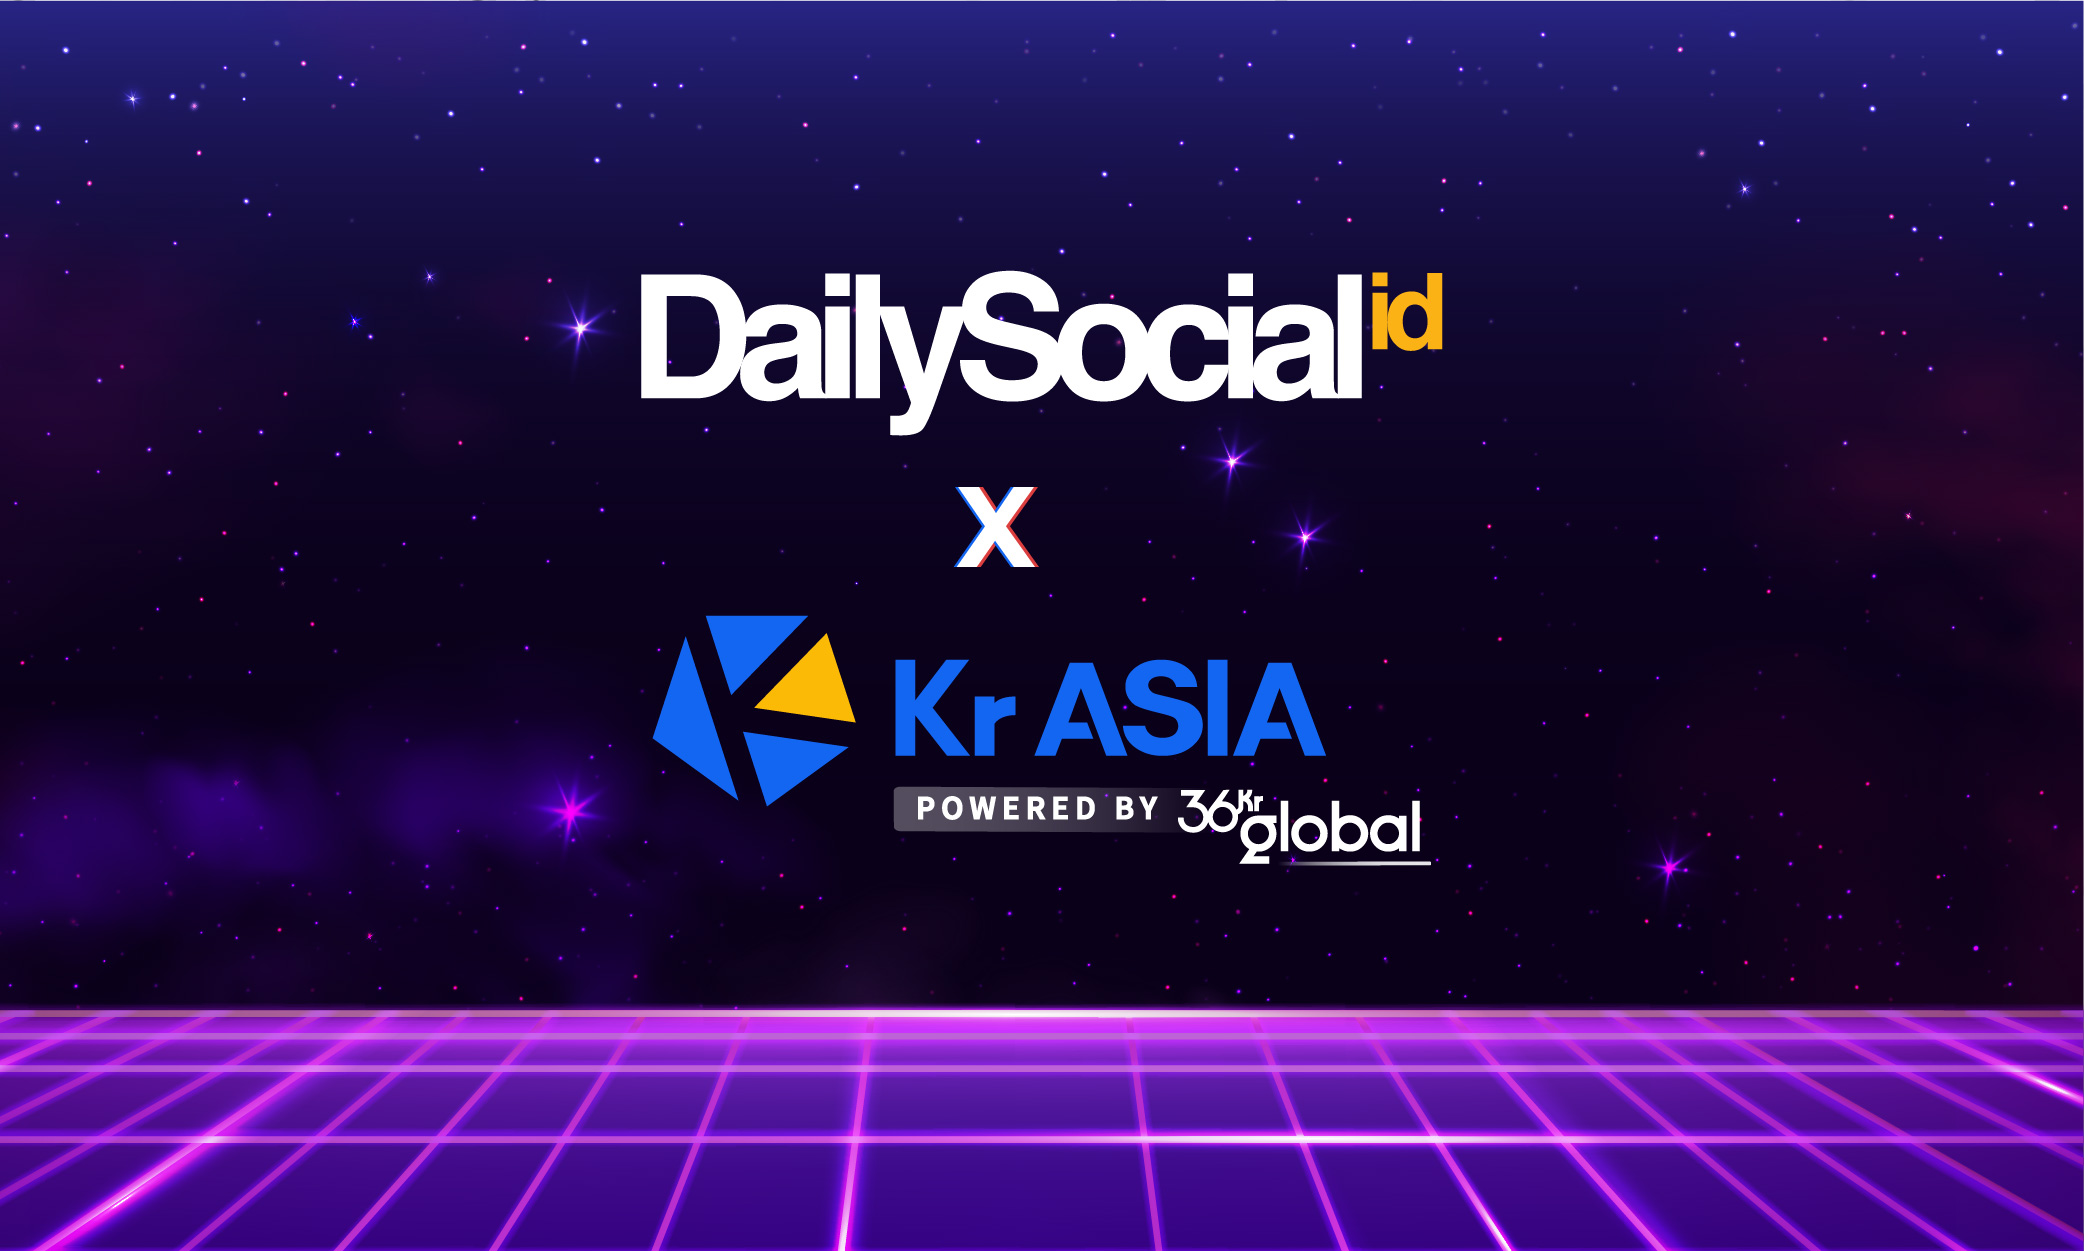 DailySocial.id and KrASIA's partnership will include editorial, innovation platform, research, and data synergy